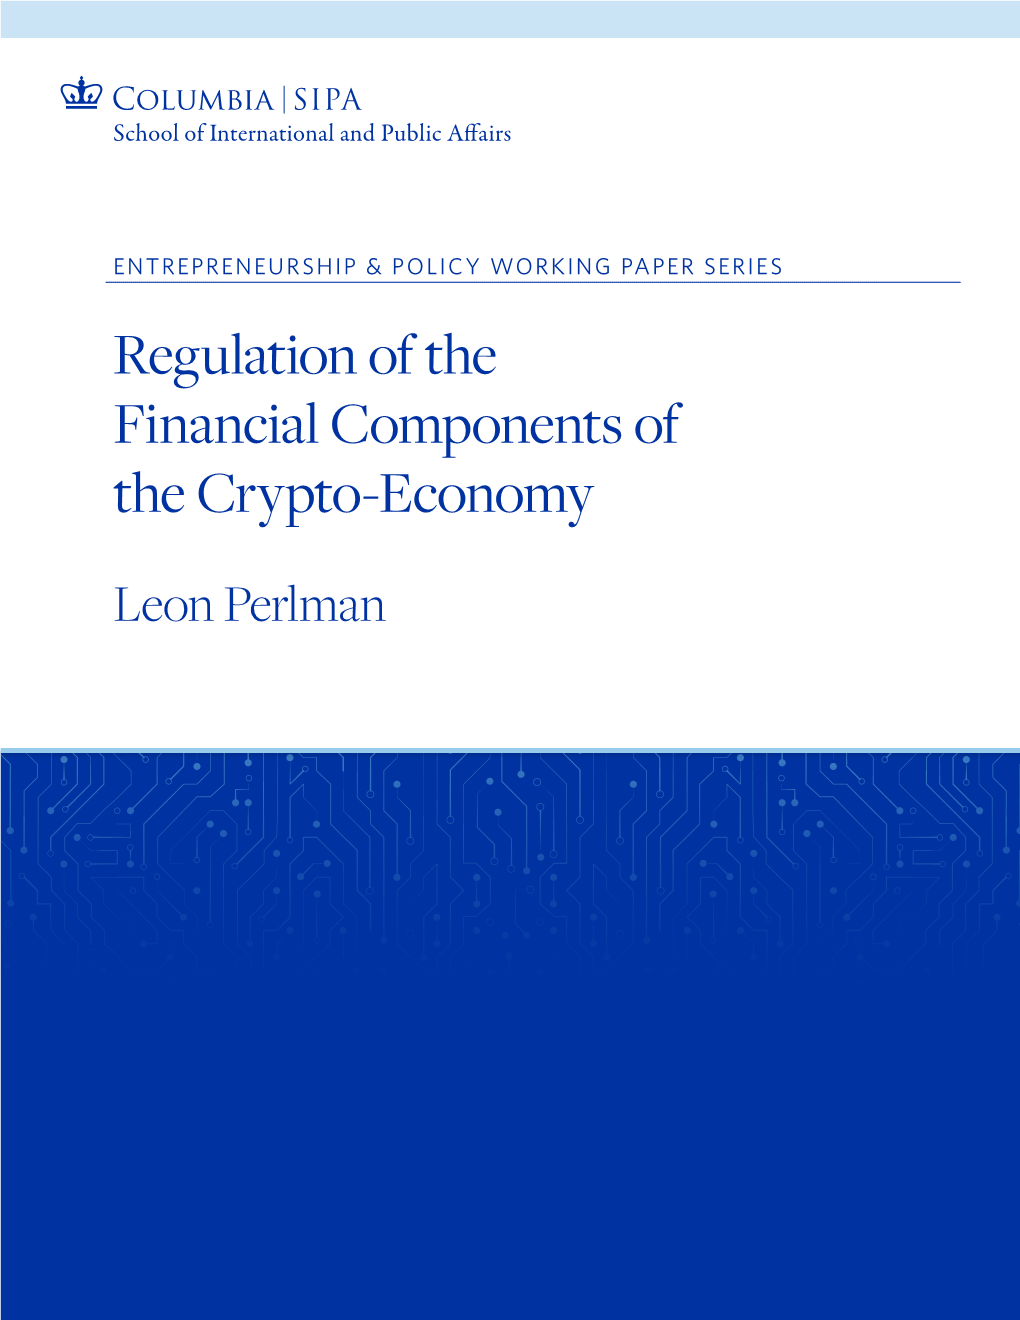 Regulation of the Financial Components of the Crypto-Economy